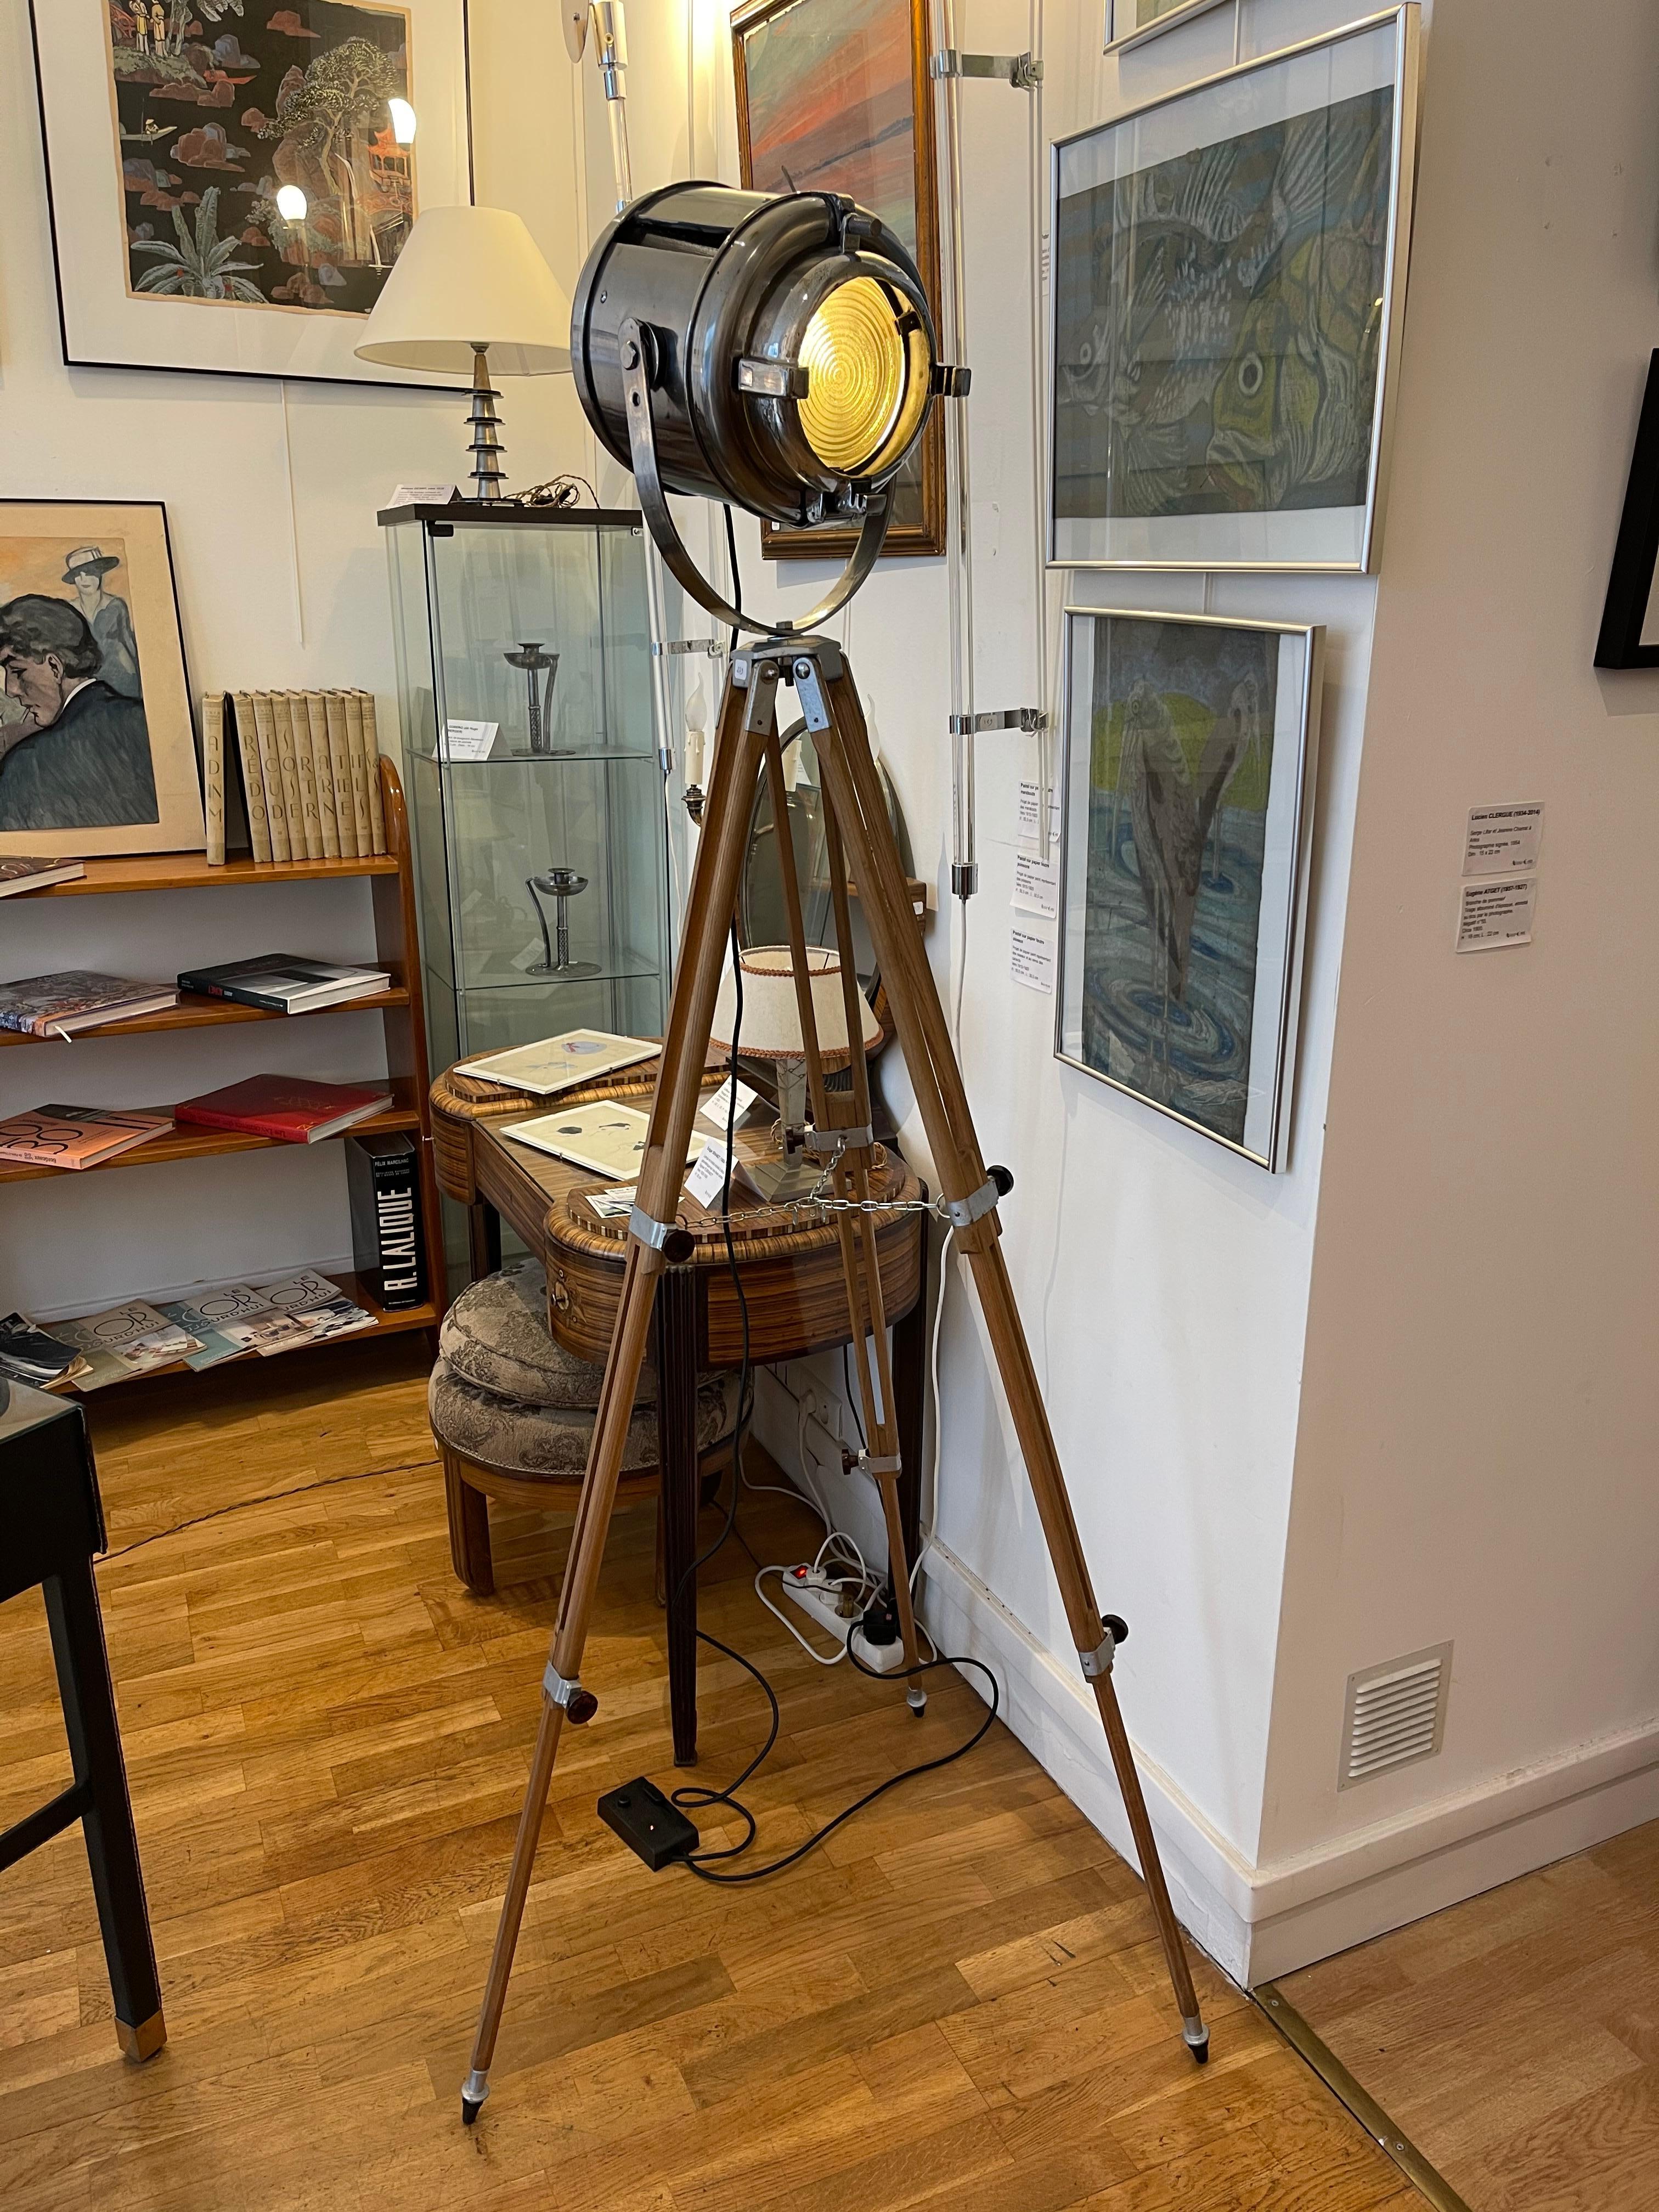 Vintage theater spotlight by Furse (from a London theater), steel body, Fresnel lens, dimmer switch, rewired, mounted on a vintage retractable wooden tripod. The spotlight has been polished to show the metal. The light has been converted for home